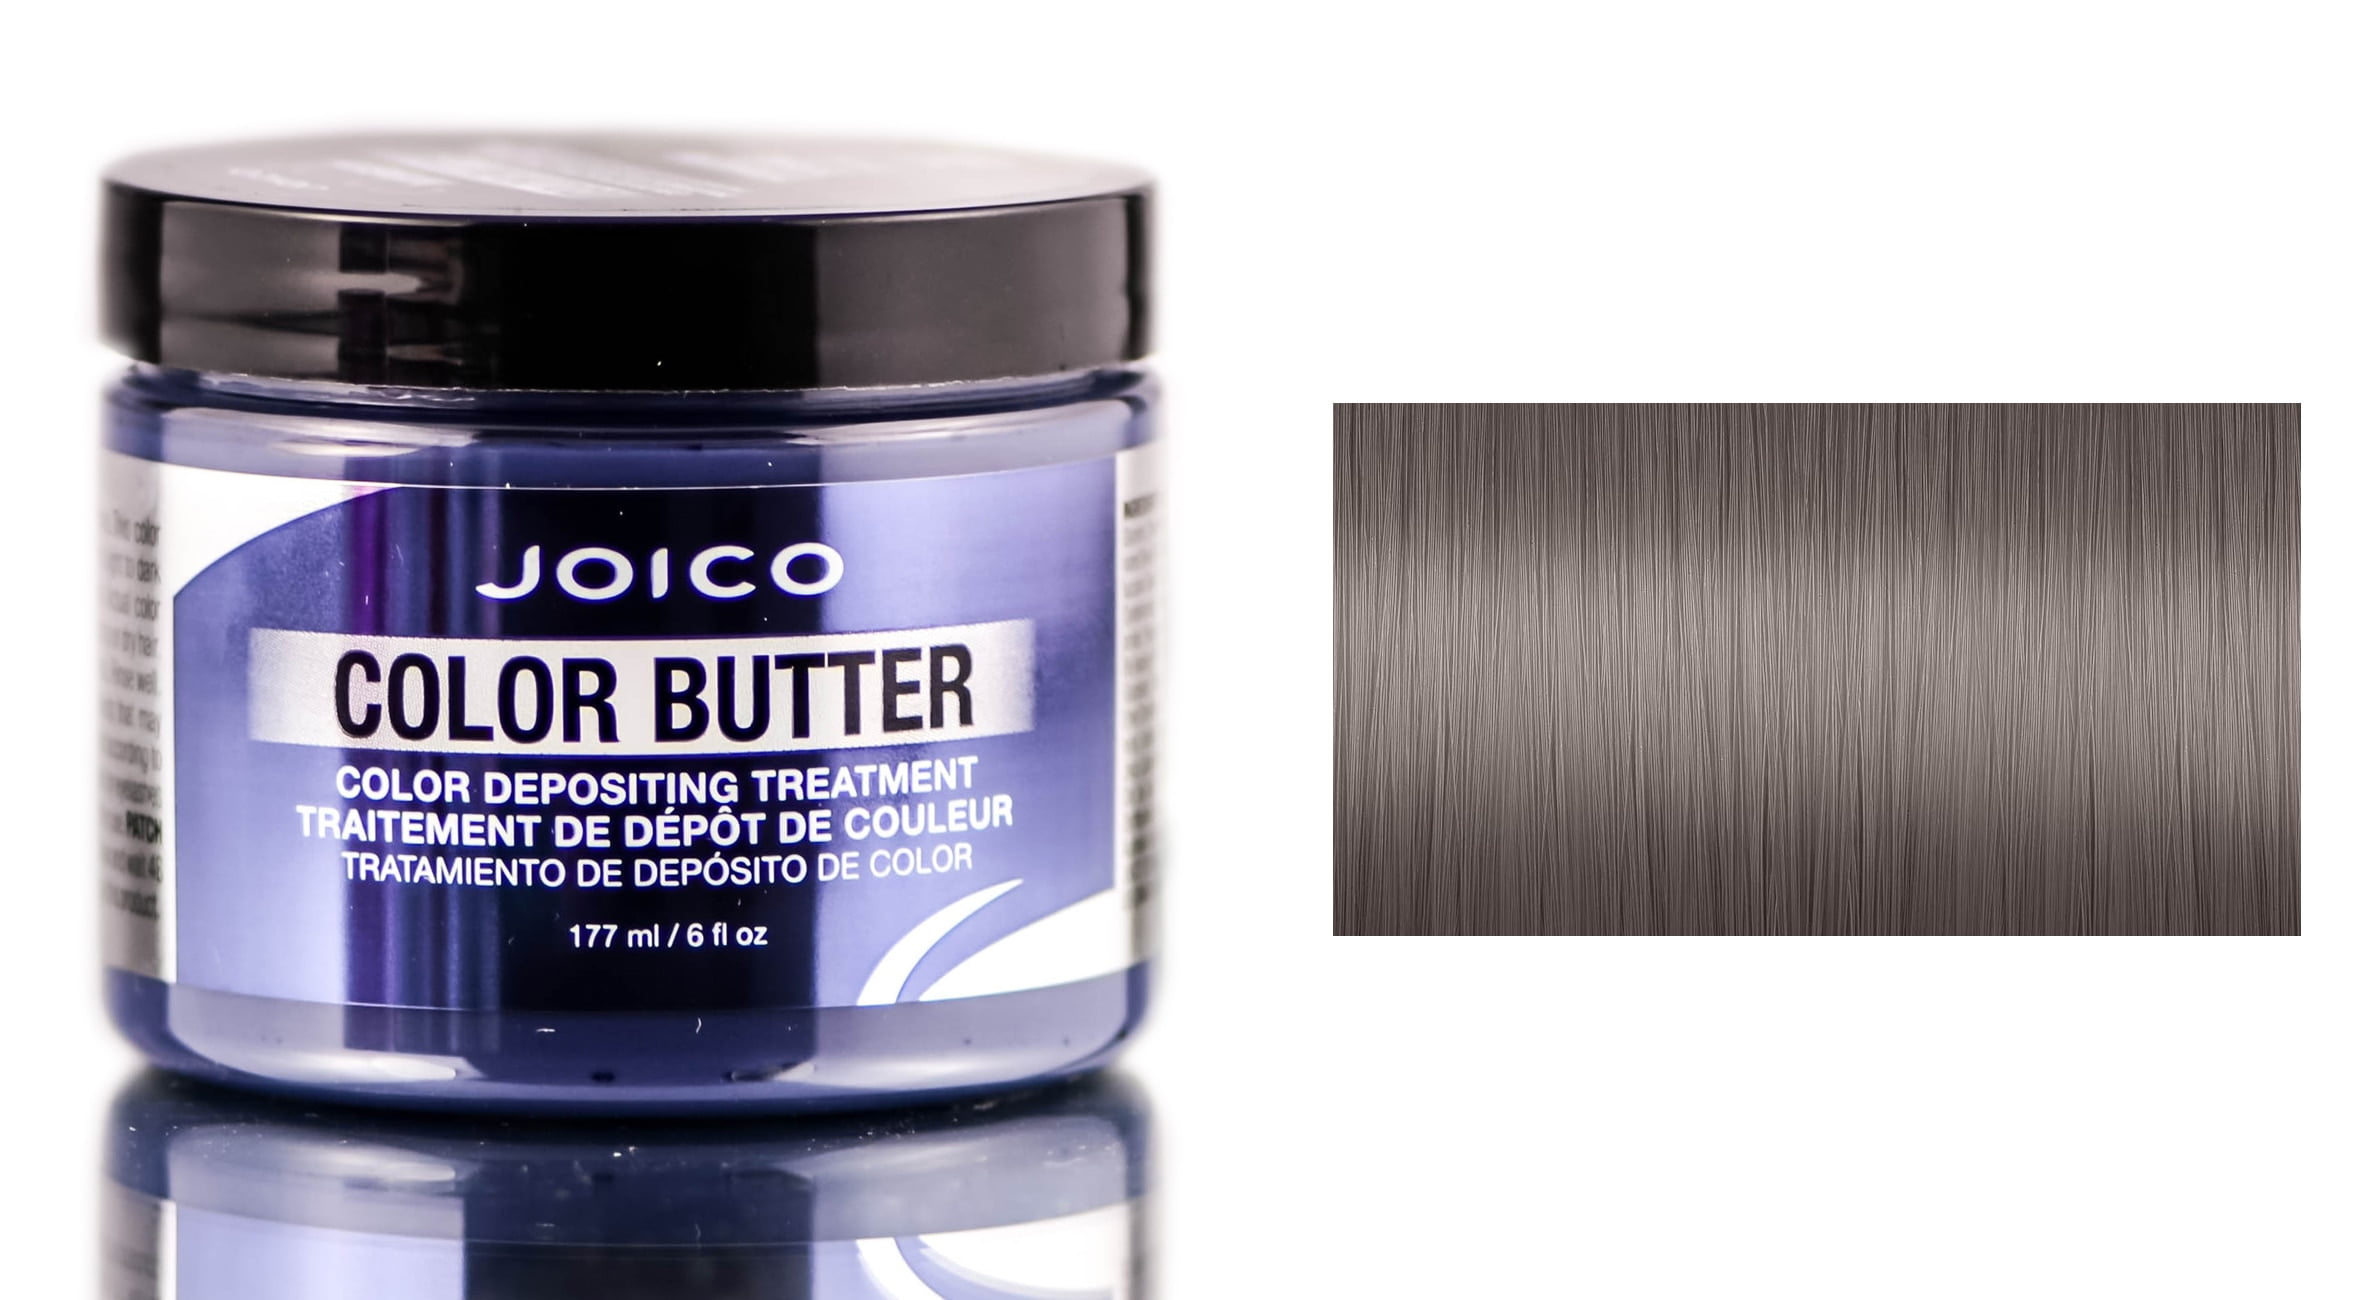 5. Joico Intensity Titanium Blue Hair Color Swatches - wide 5